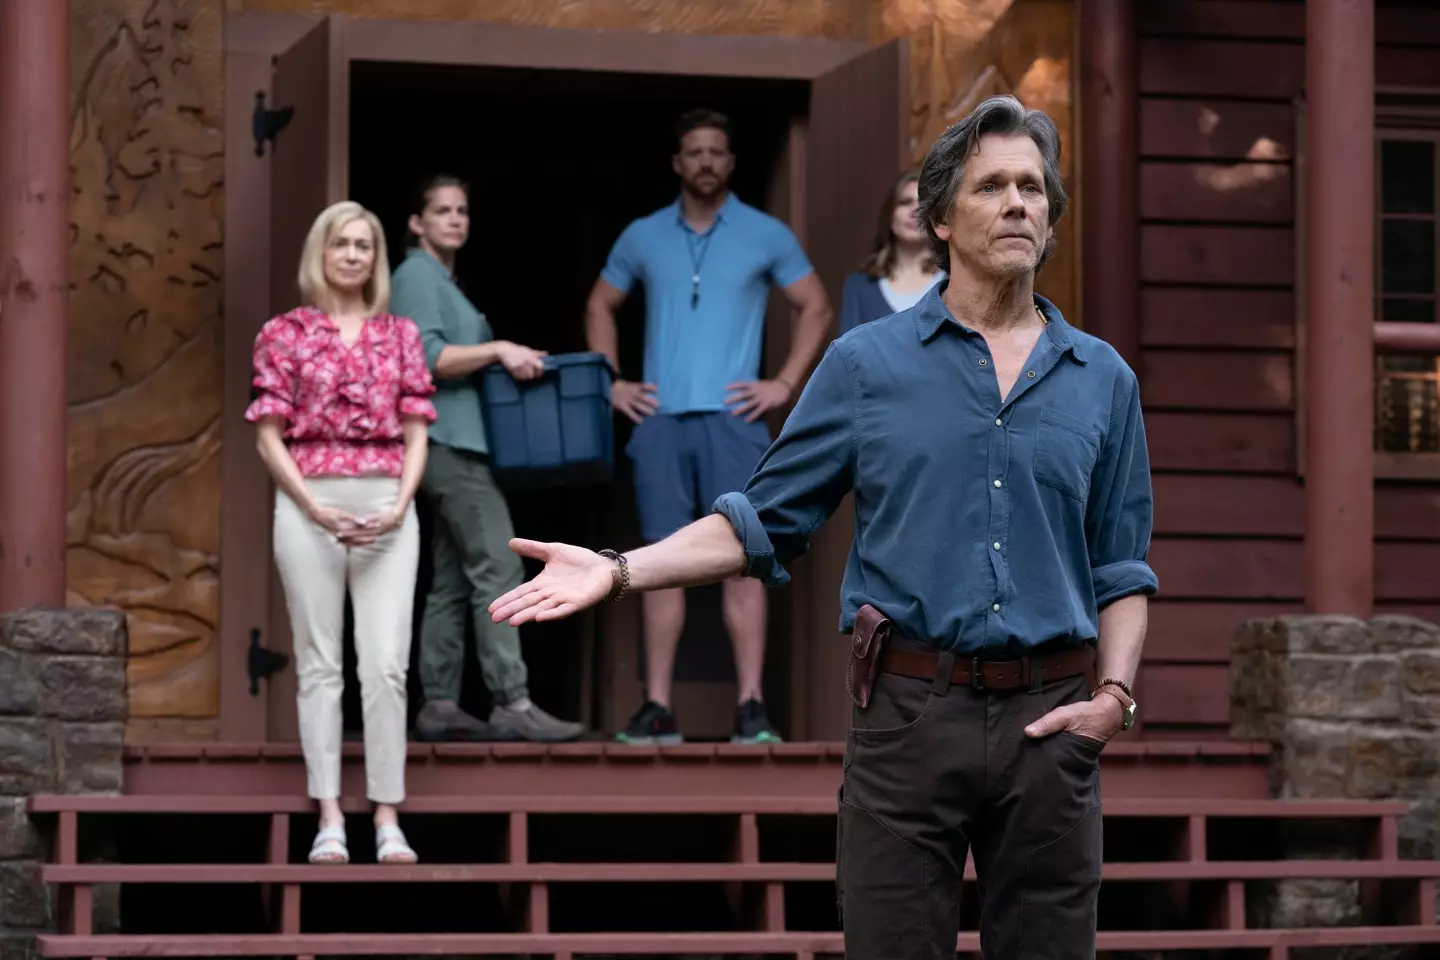 Kevin Bacon cut his horror movie teeth in Friday the 13th, now he's back at as an evil gay conversion camp leader.